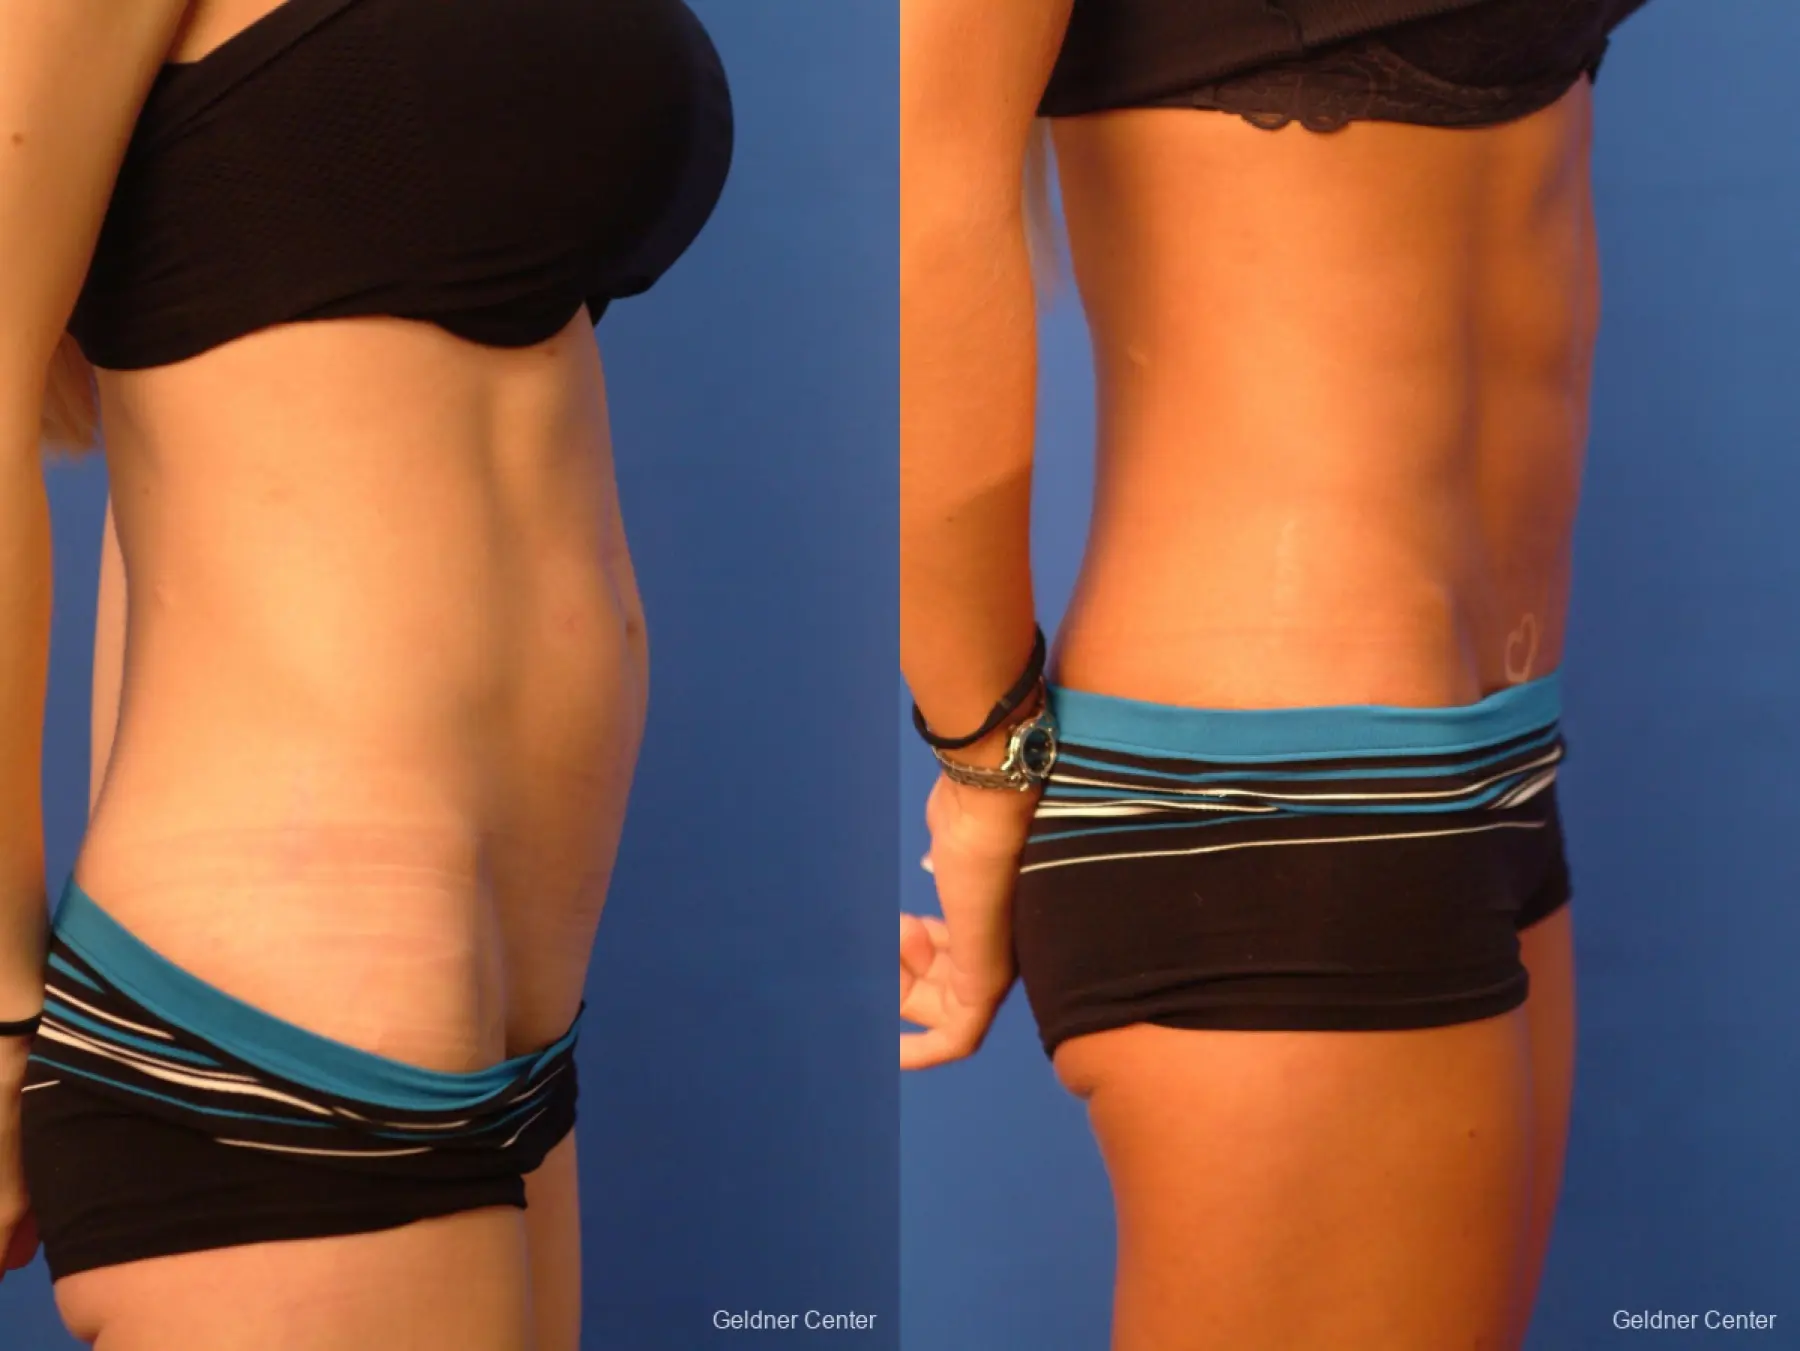  Vaser Liposuction with Abdominal Etching - Before and After 2